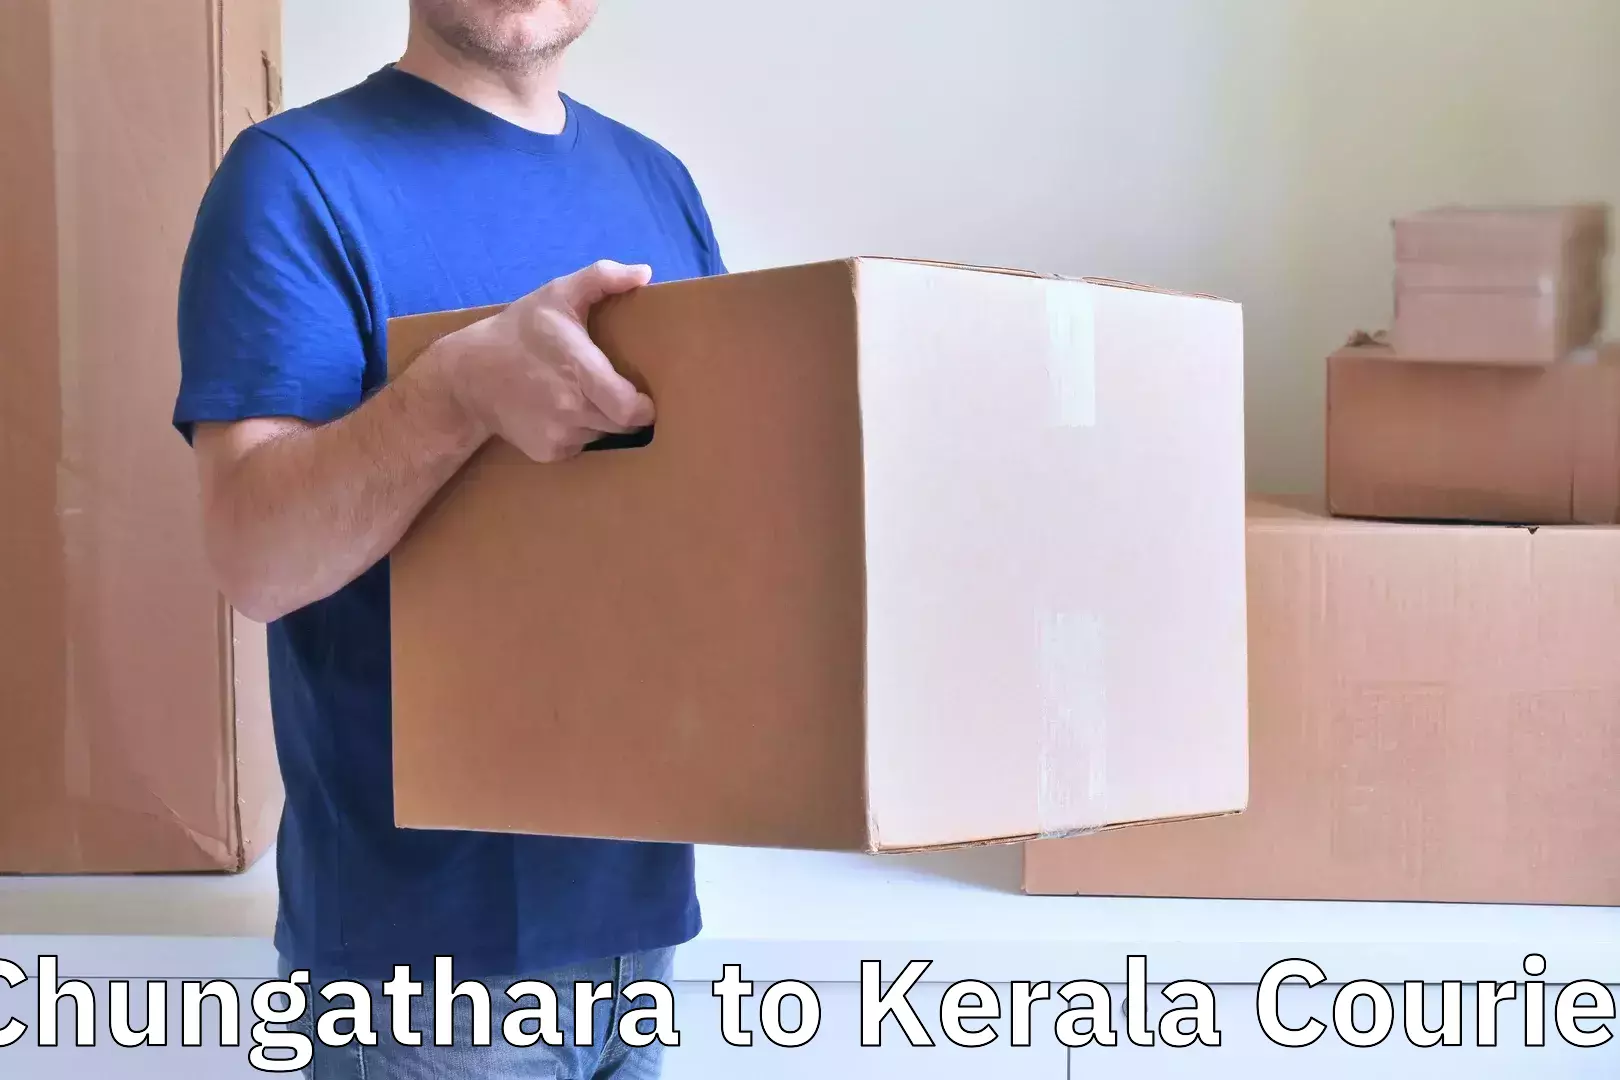 Reliable baggage delivery Chungathara to Cochin Port Kochi